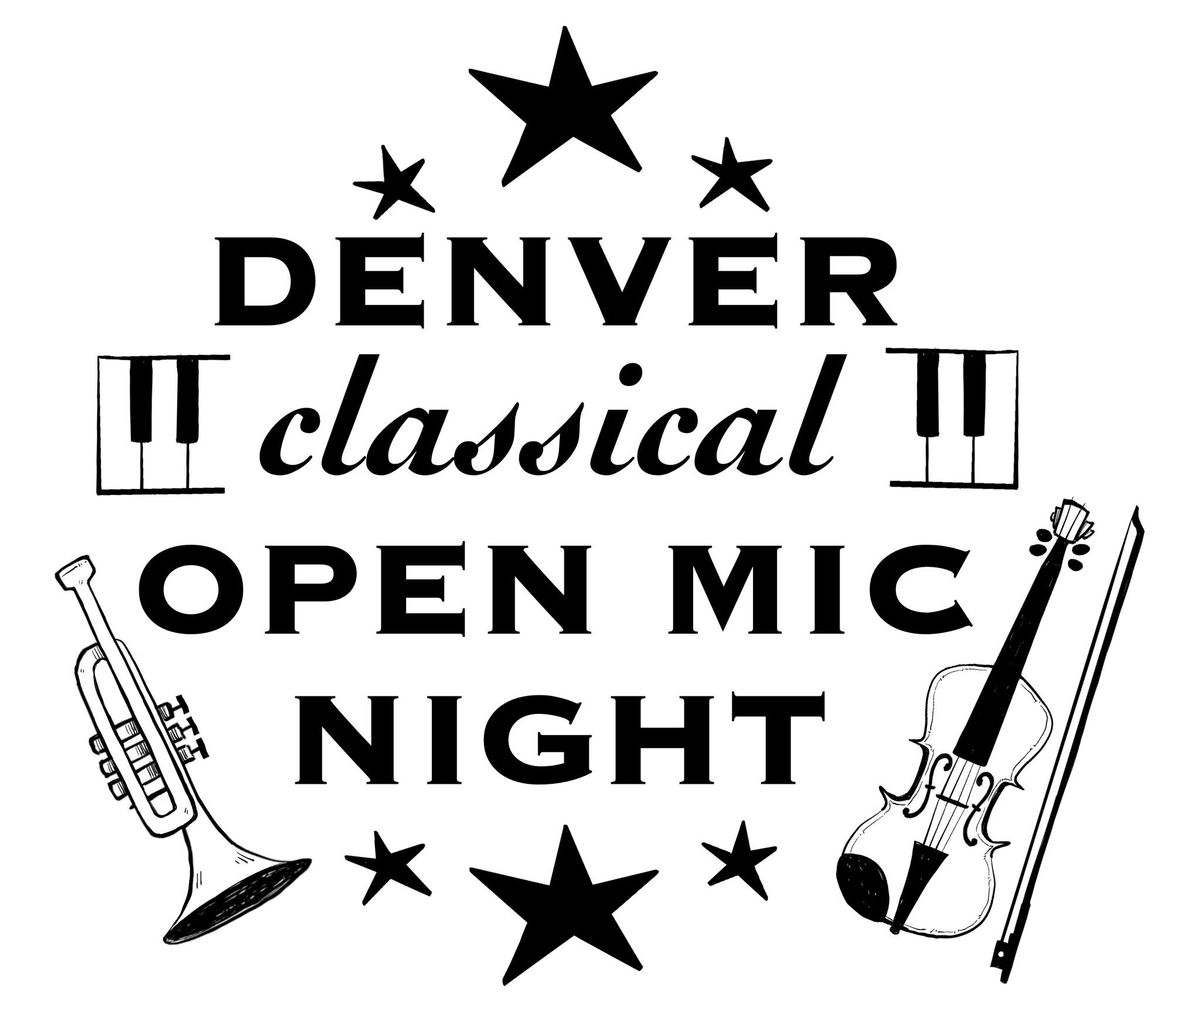 May Denver Classical Open Mic Night